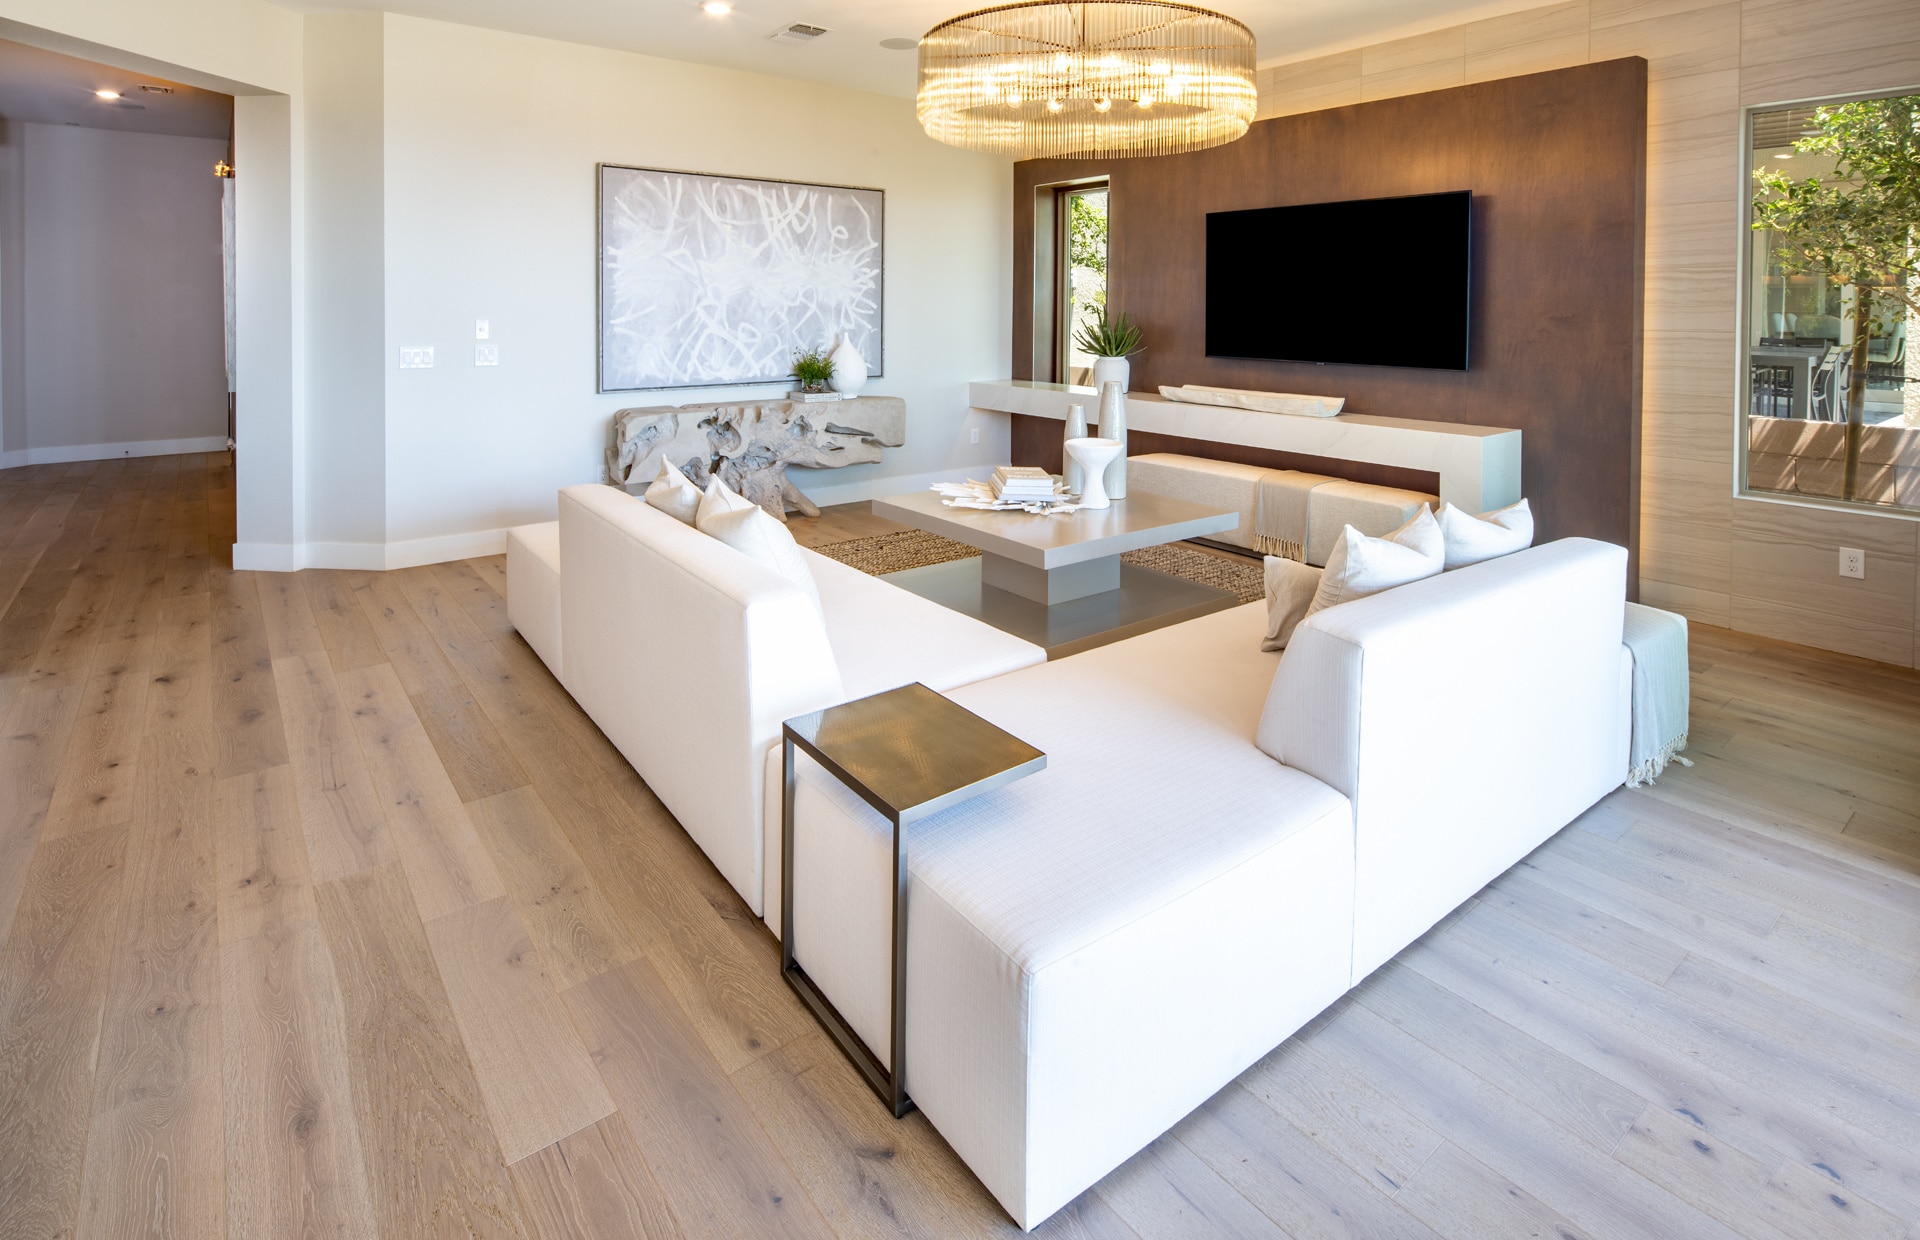 Living Room of Cesena Model at Carmel Cliff by Pulte Homes